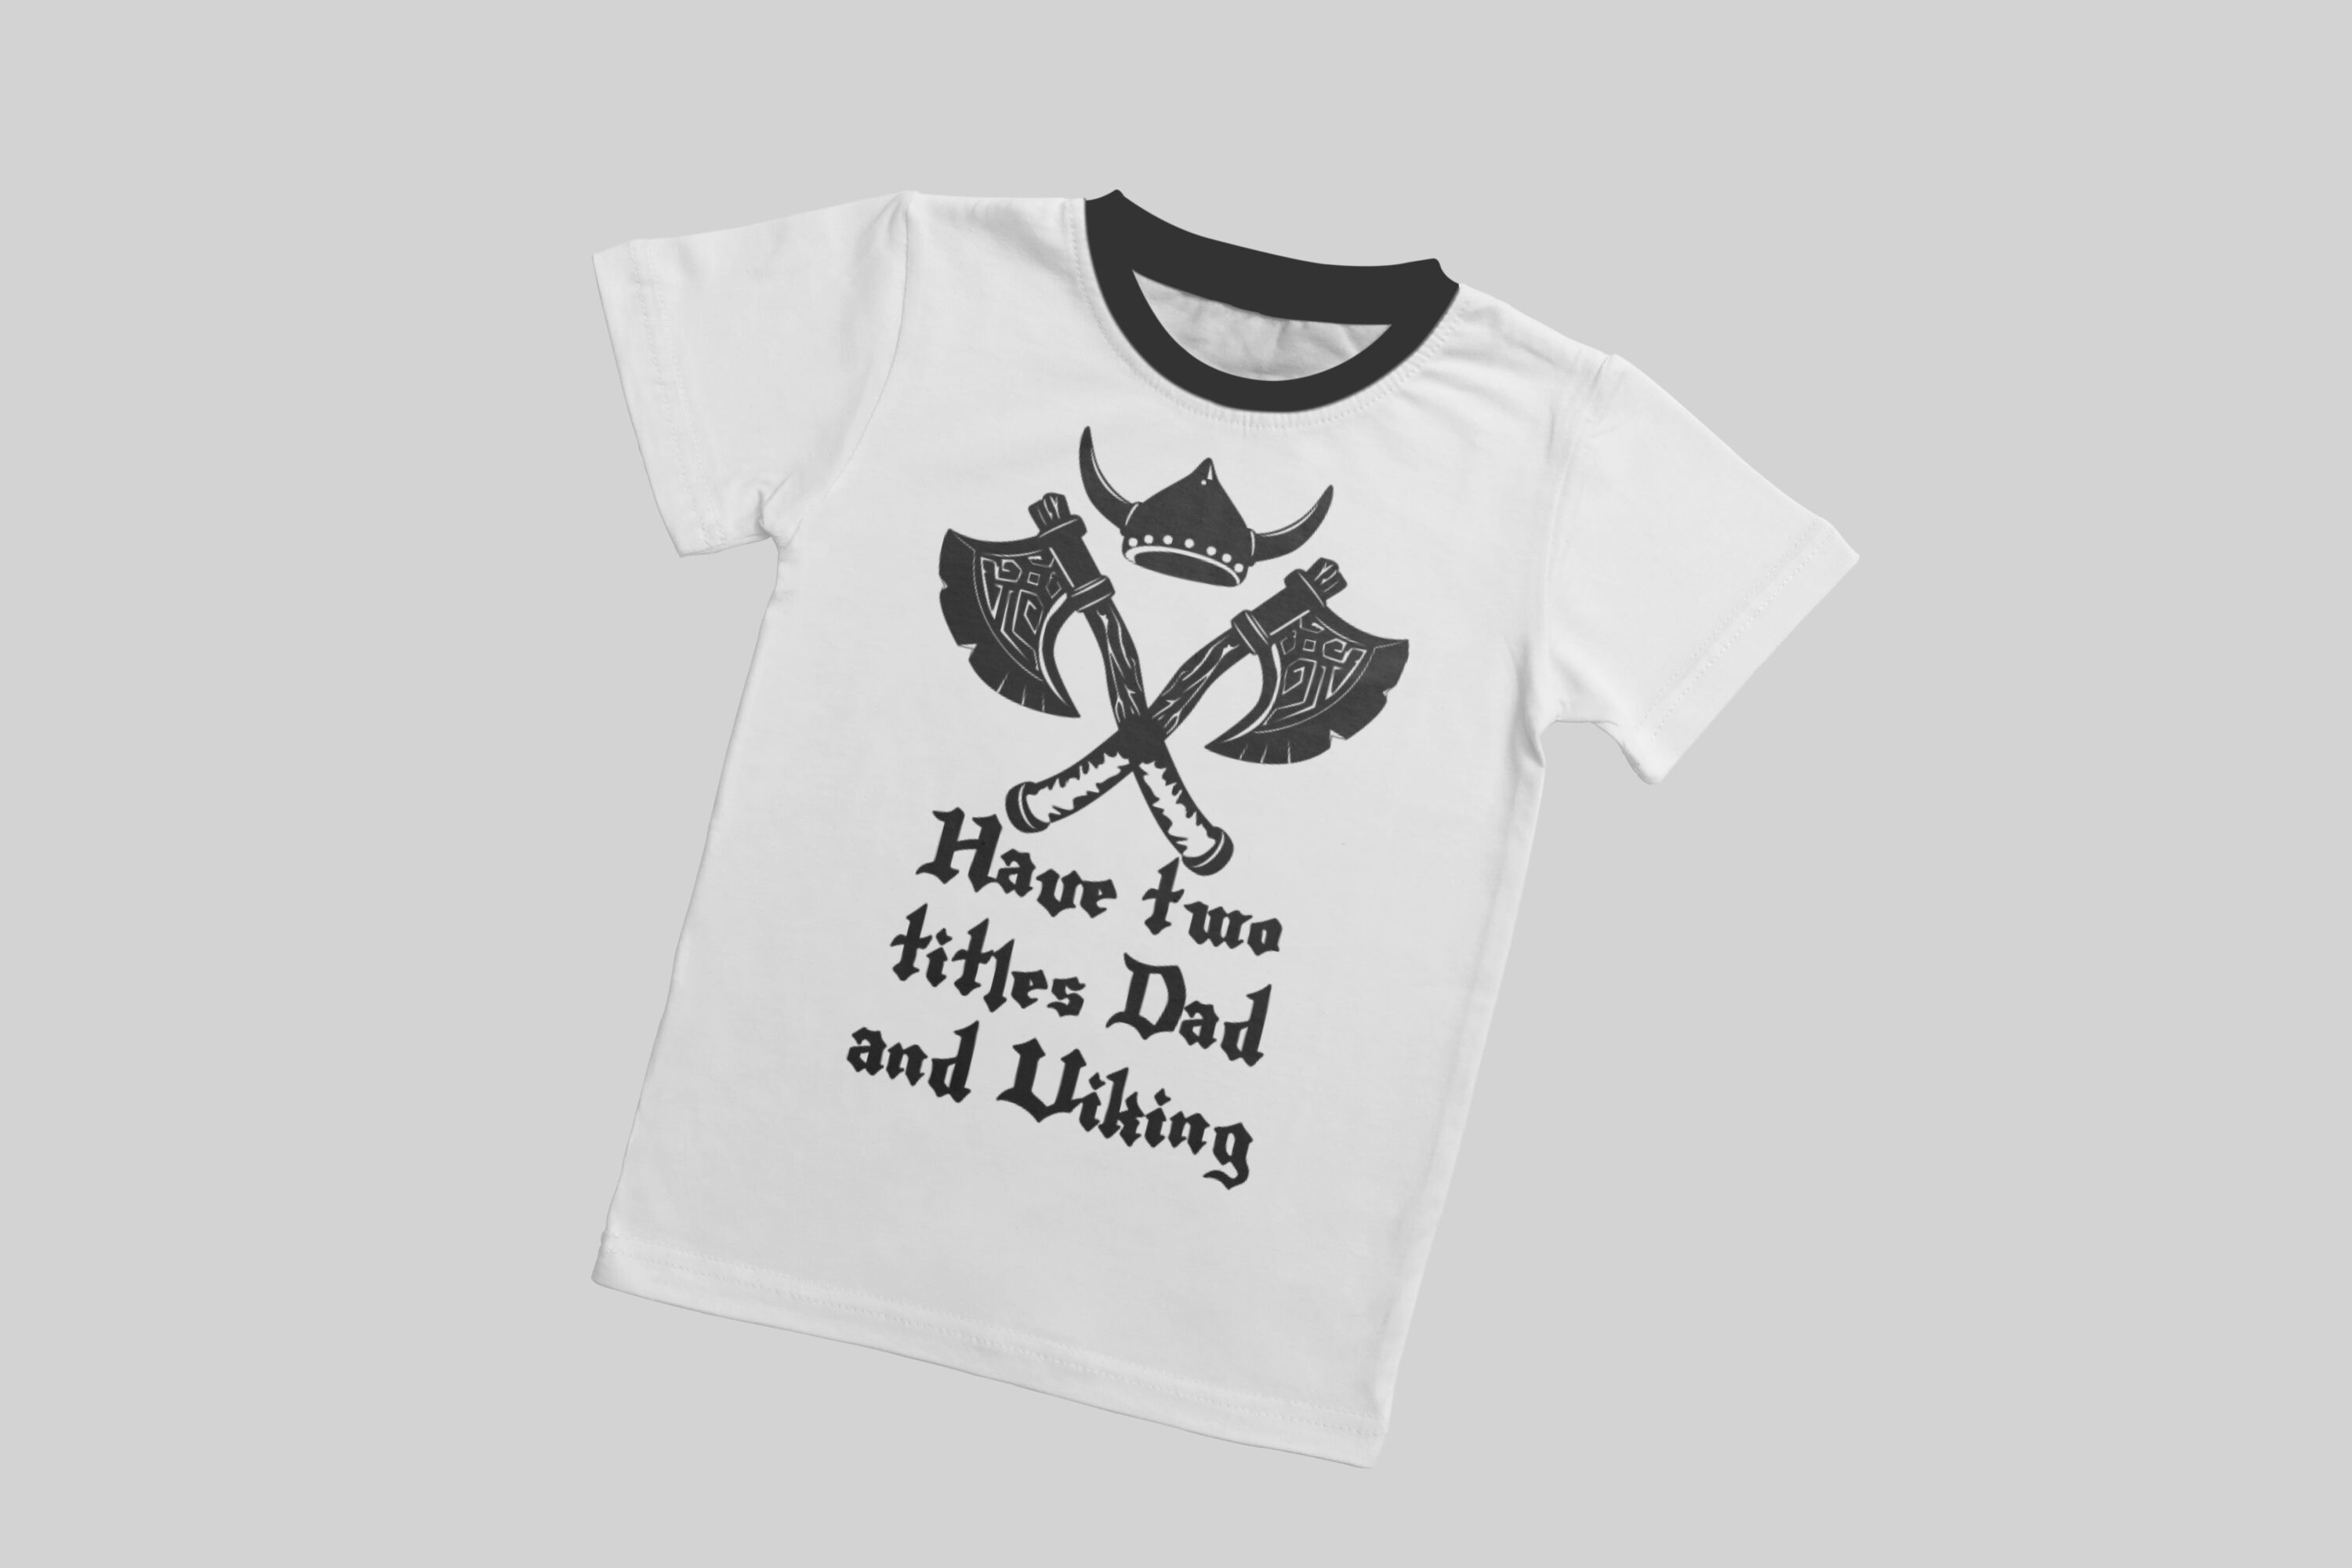 Two vicing axes with the horses hat on the white t-shirt.